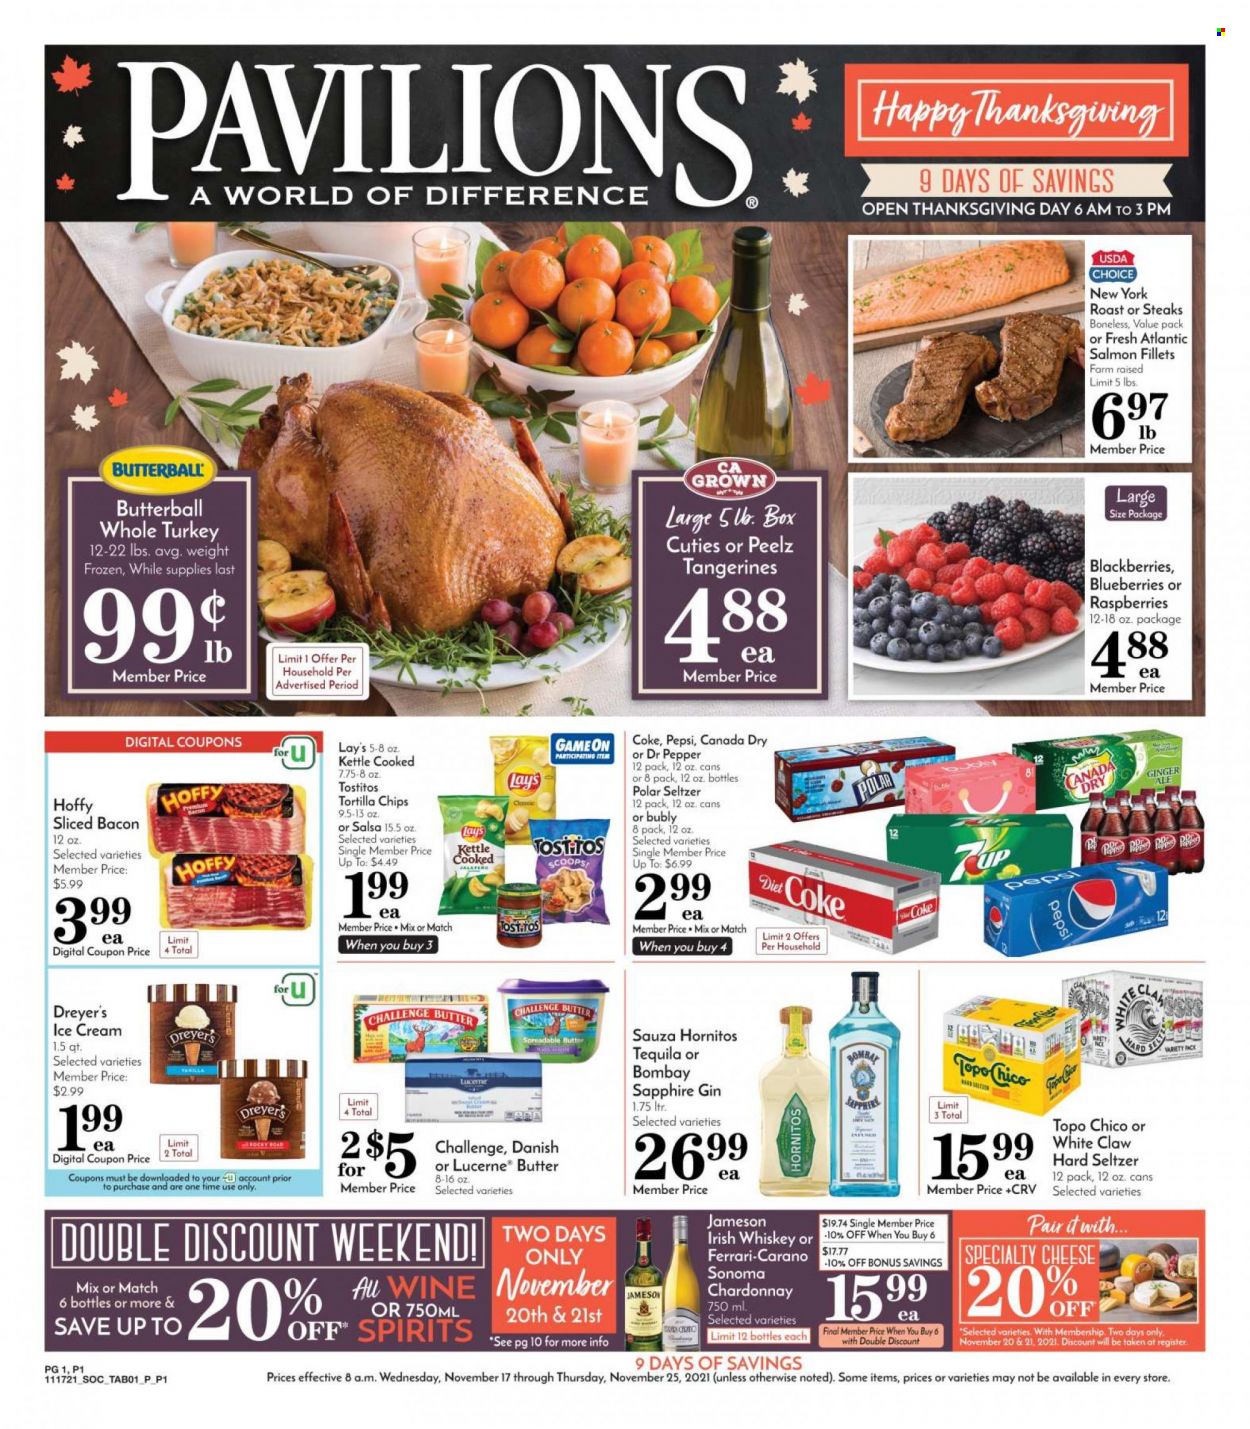 thumbnail - Pavilions Flyer - 11/17/2021 - 11/25/2021 - Sales products - blueberries, salmon, salmon fillet, bacon, Butterball, cheese, spreadable butter, ice cream, tortilla chips, Lay’s, Tostitos, salsa, Canada Dry, Coca-Cola, ginger ale, Pepsi, Dr. Pepper, white wine, Chardonnay, wine, gin, tequila, whiskey, irish whiskey, Jameson, White Claw, Hard Seltzer, whisky, whole turkey, steak, tangerines. Page 1.